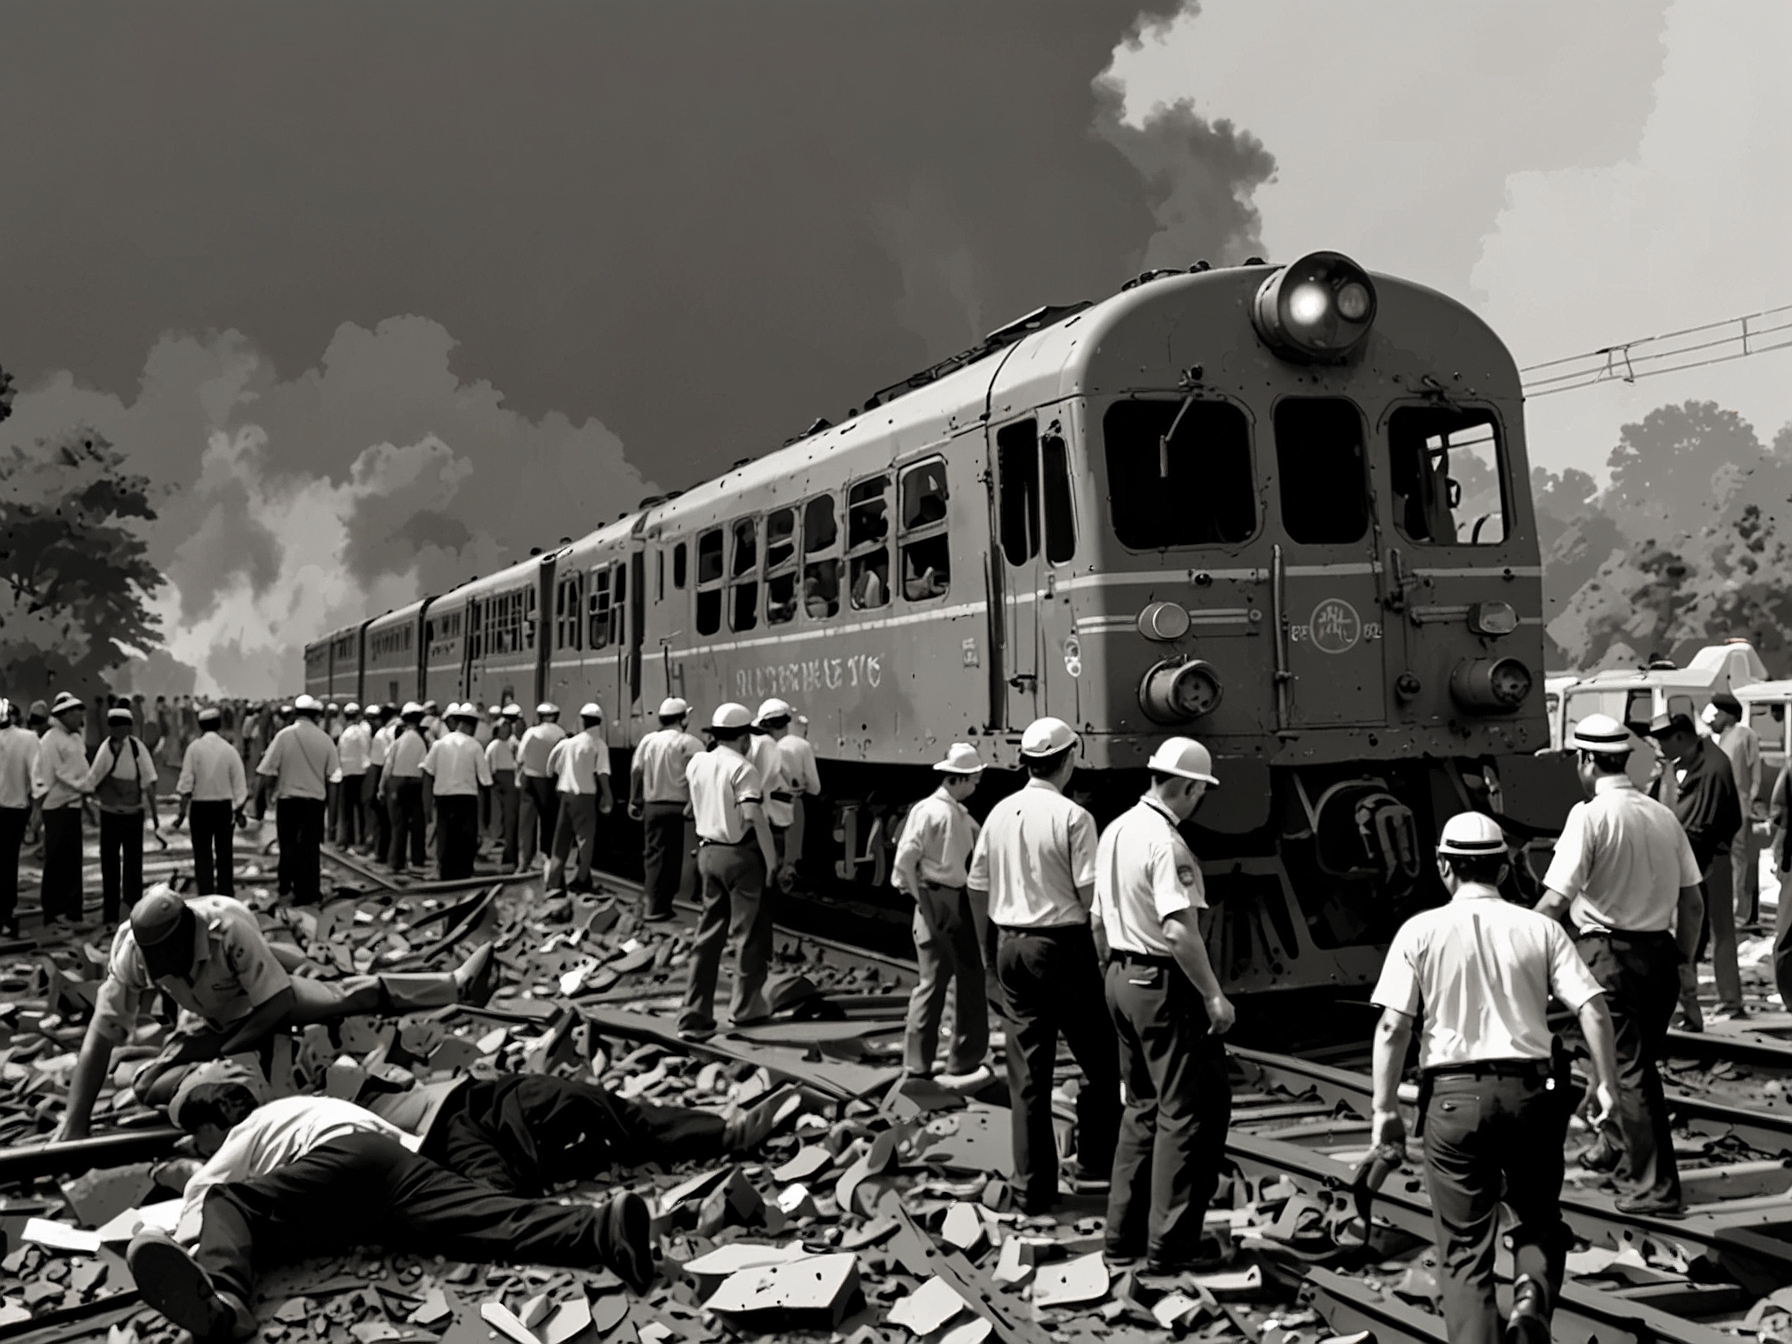 Emergency rescue workers assist injured passengers at the site of the collision between the goods train and the Kanchenjunga Express, depicting the chaos and damage caused by the impact.